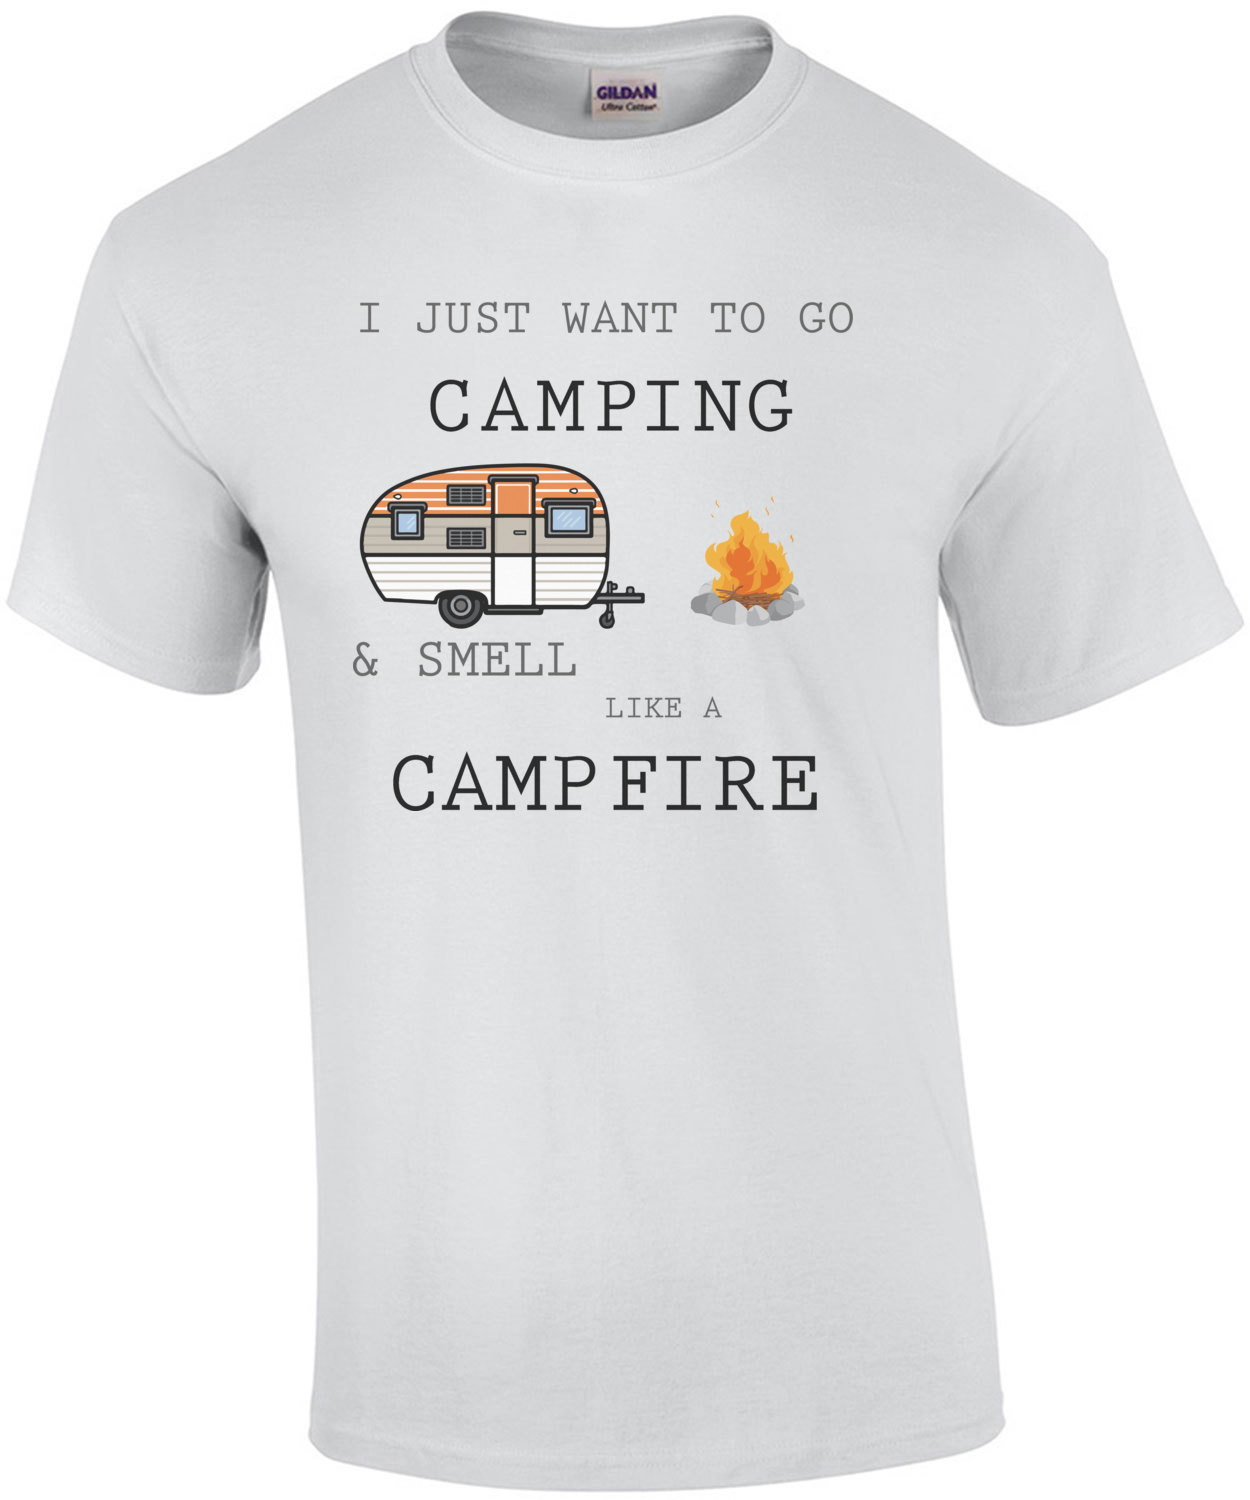 I just want to go camping and smell like a campfire. Funny camping t-shirt